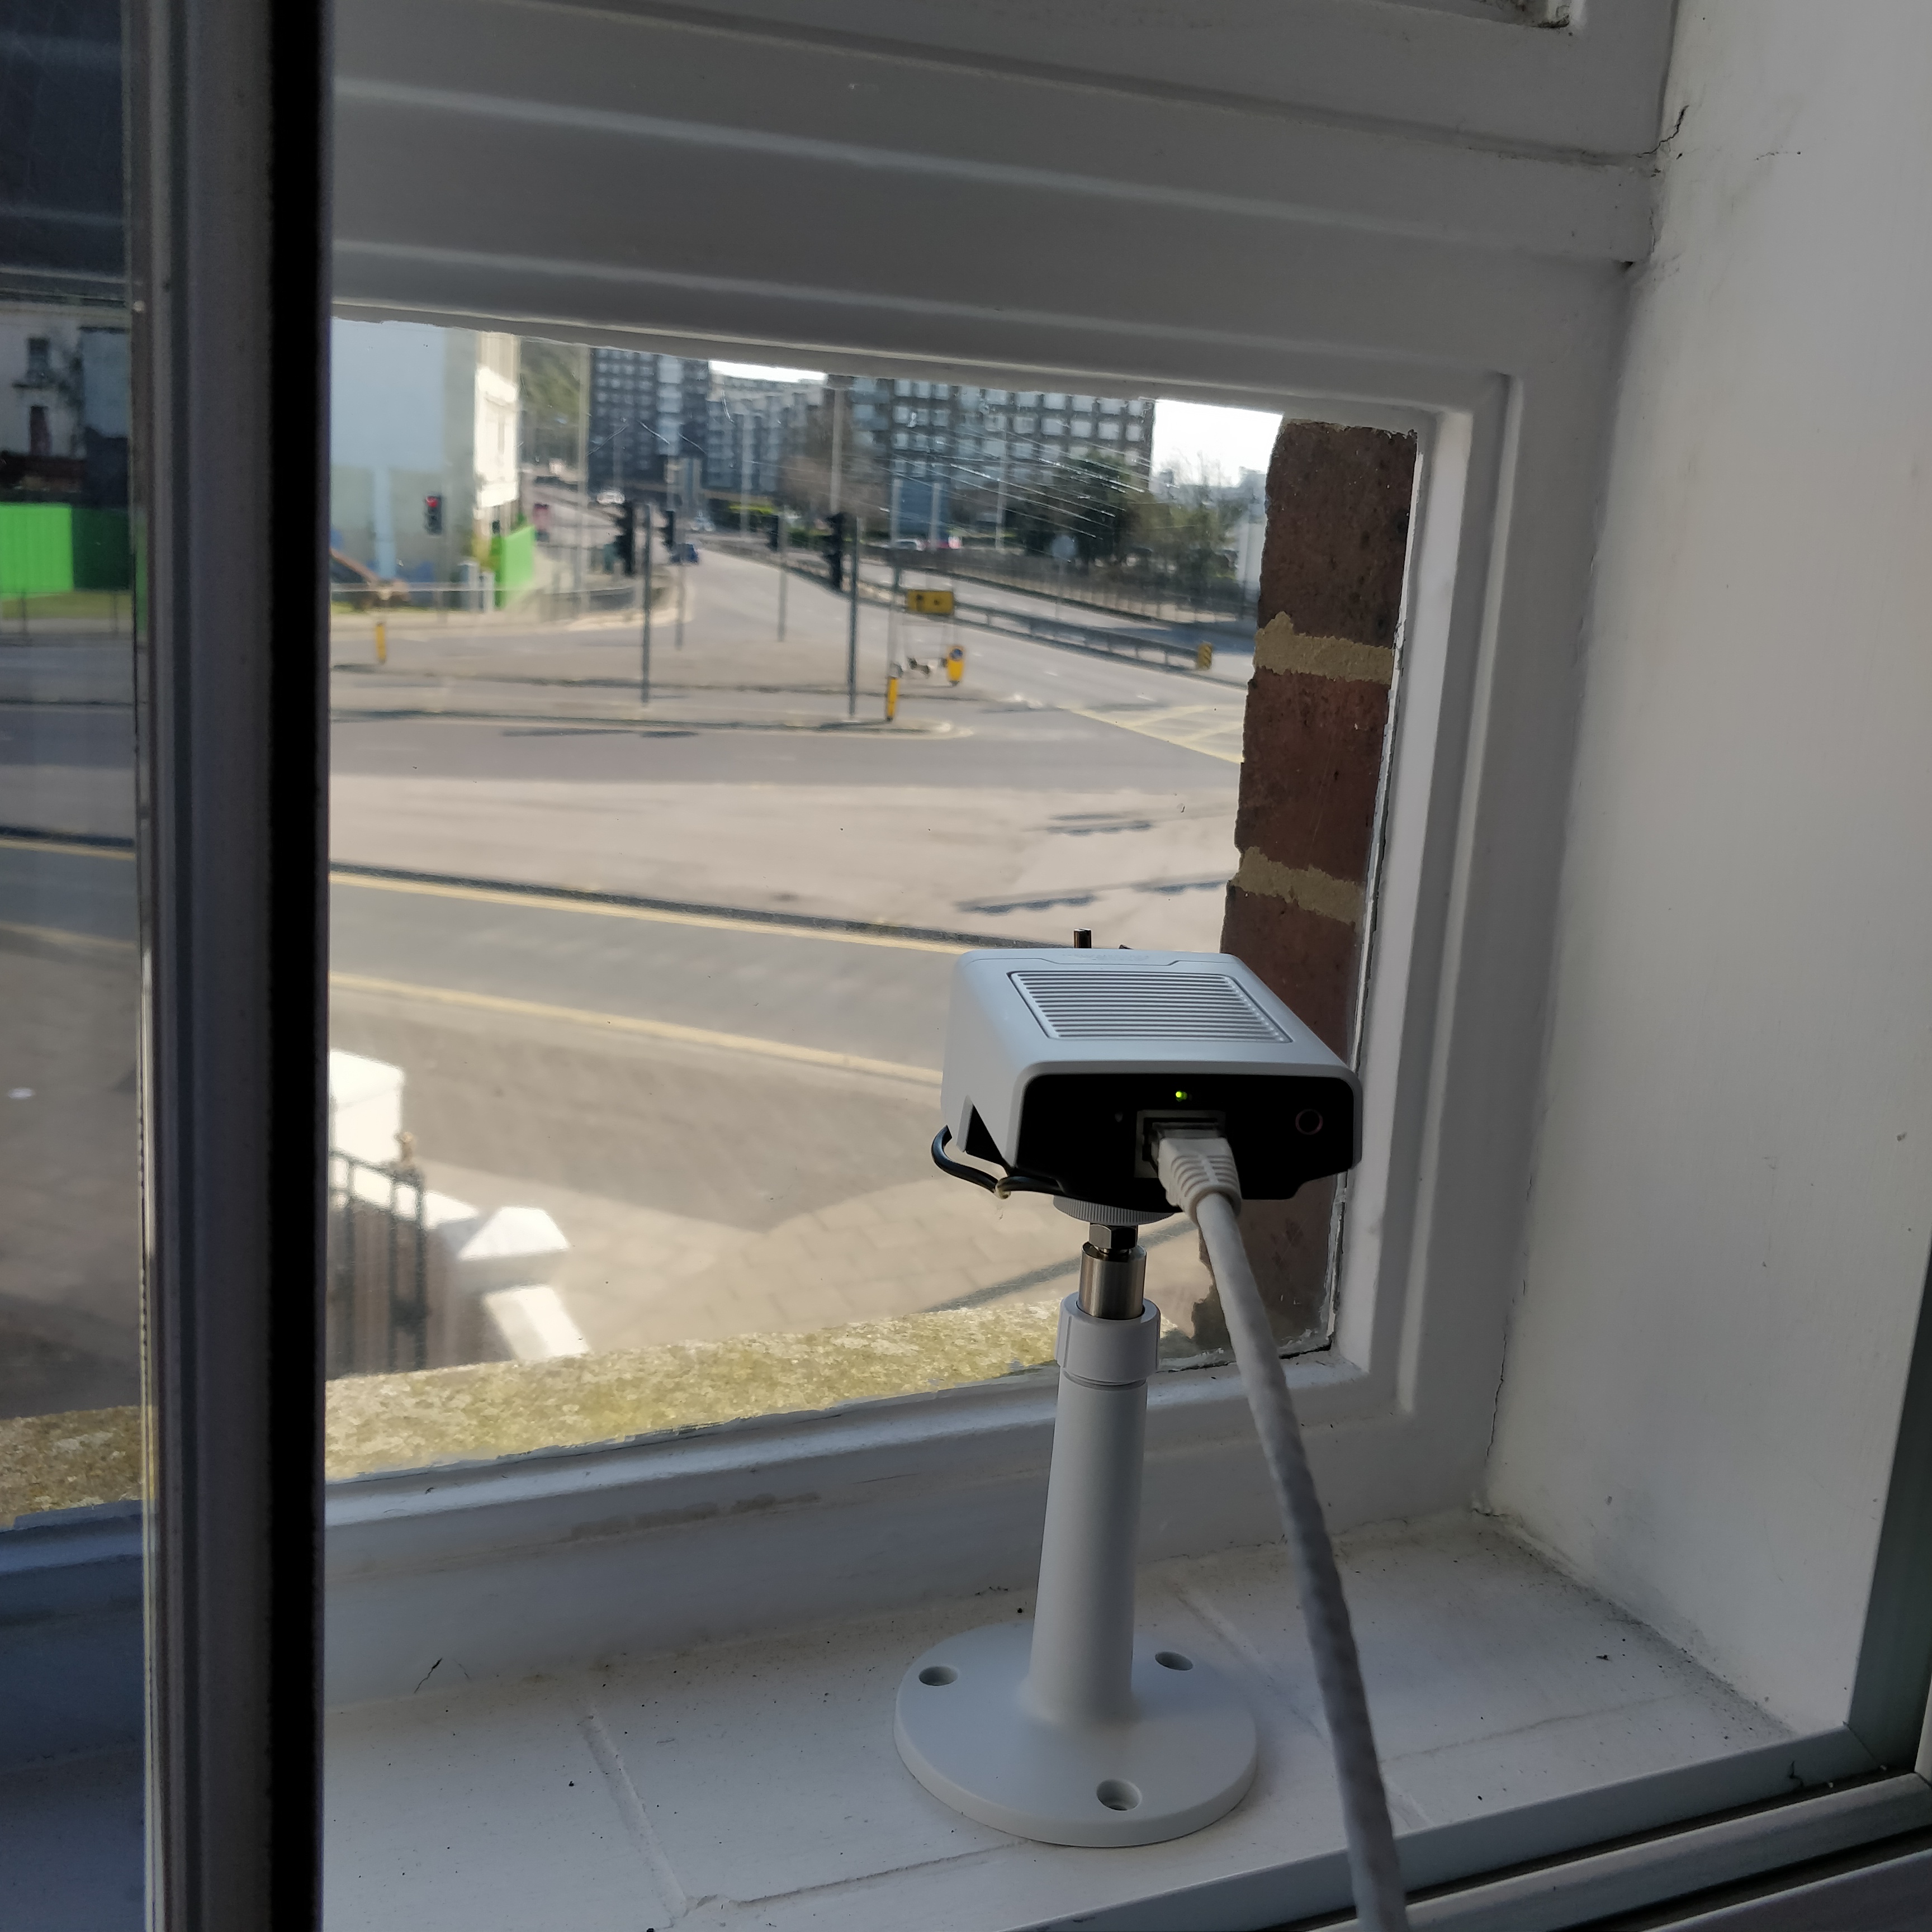 Axis M1135 IP camera looking through our window 2-4-20.jpg